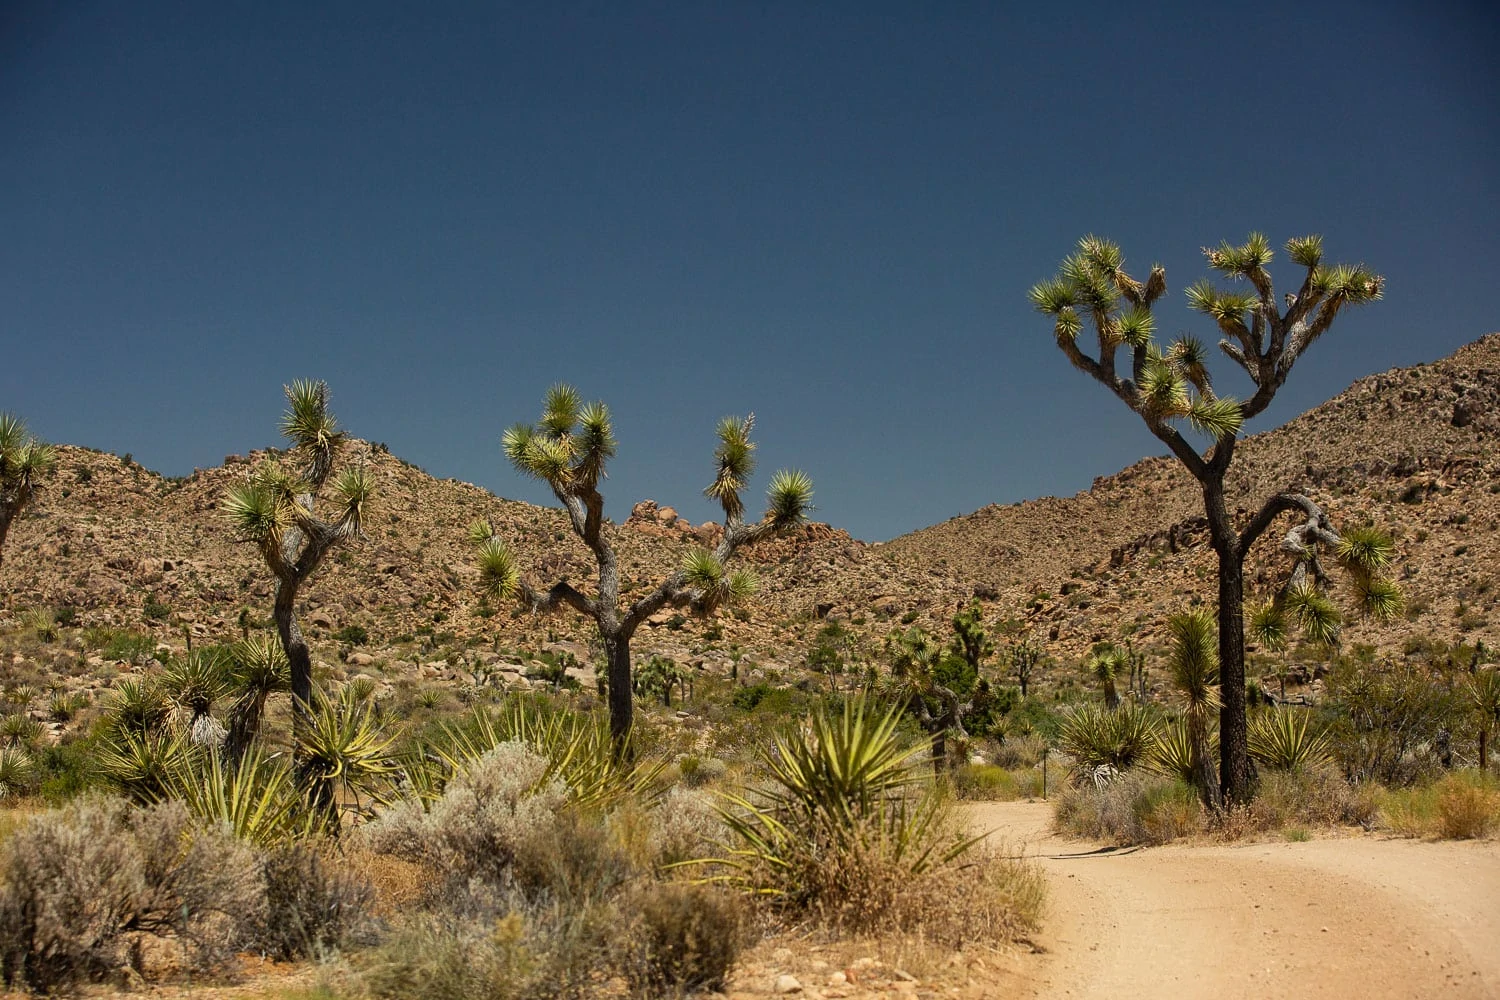 Rocks and trees make up the landscape of Queen's Mine in Joshua Tree National Park.